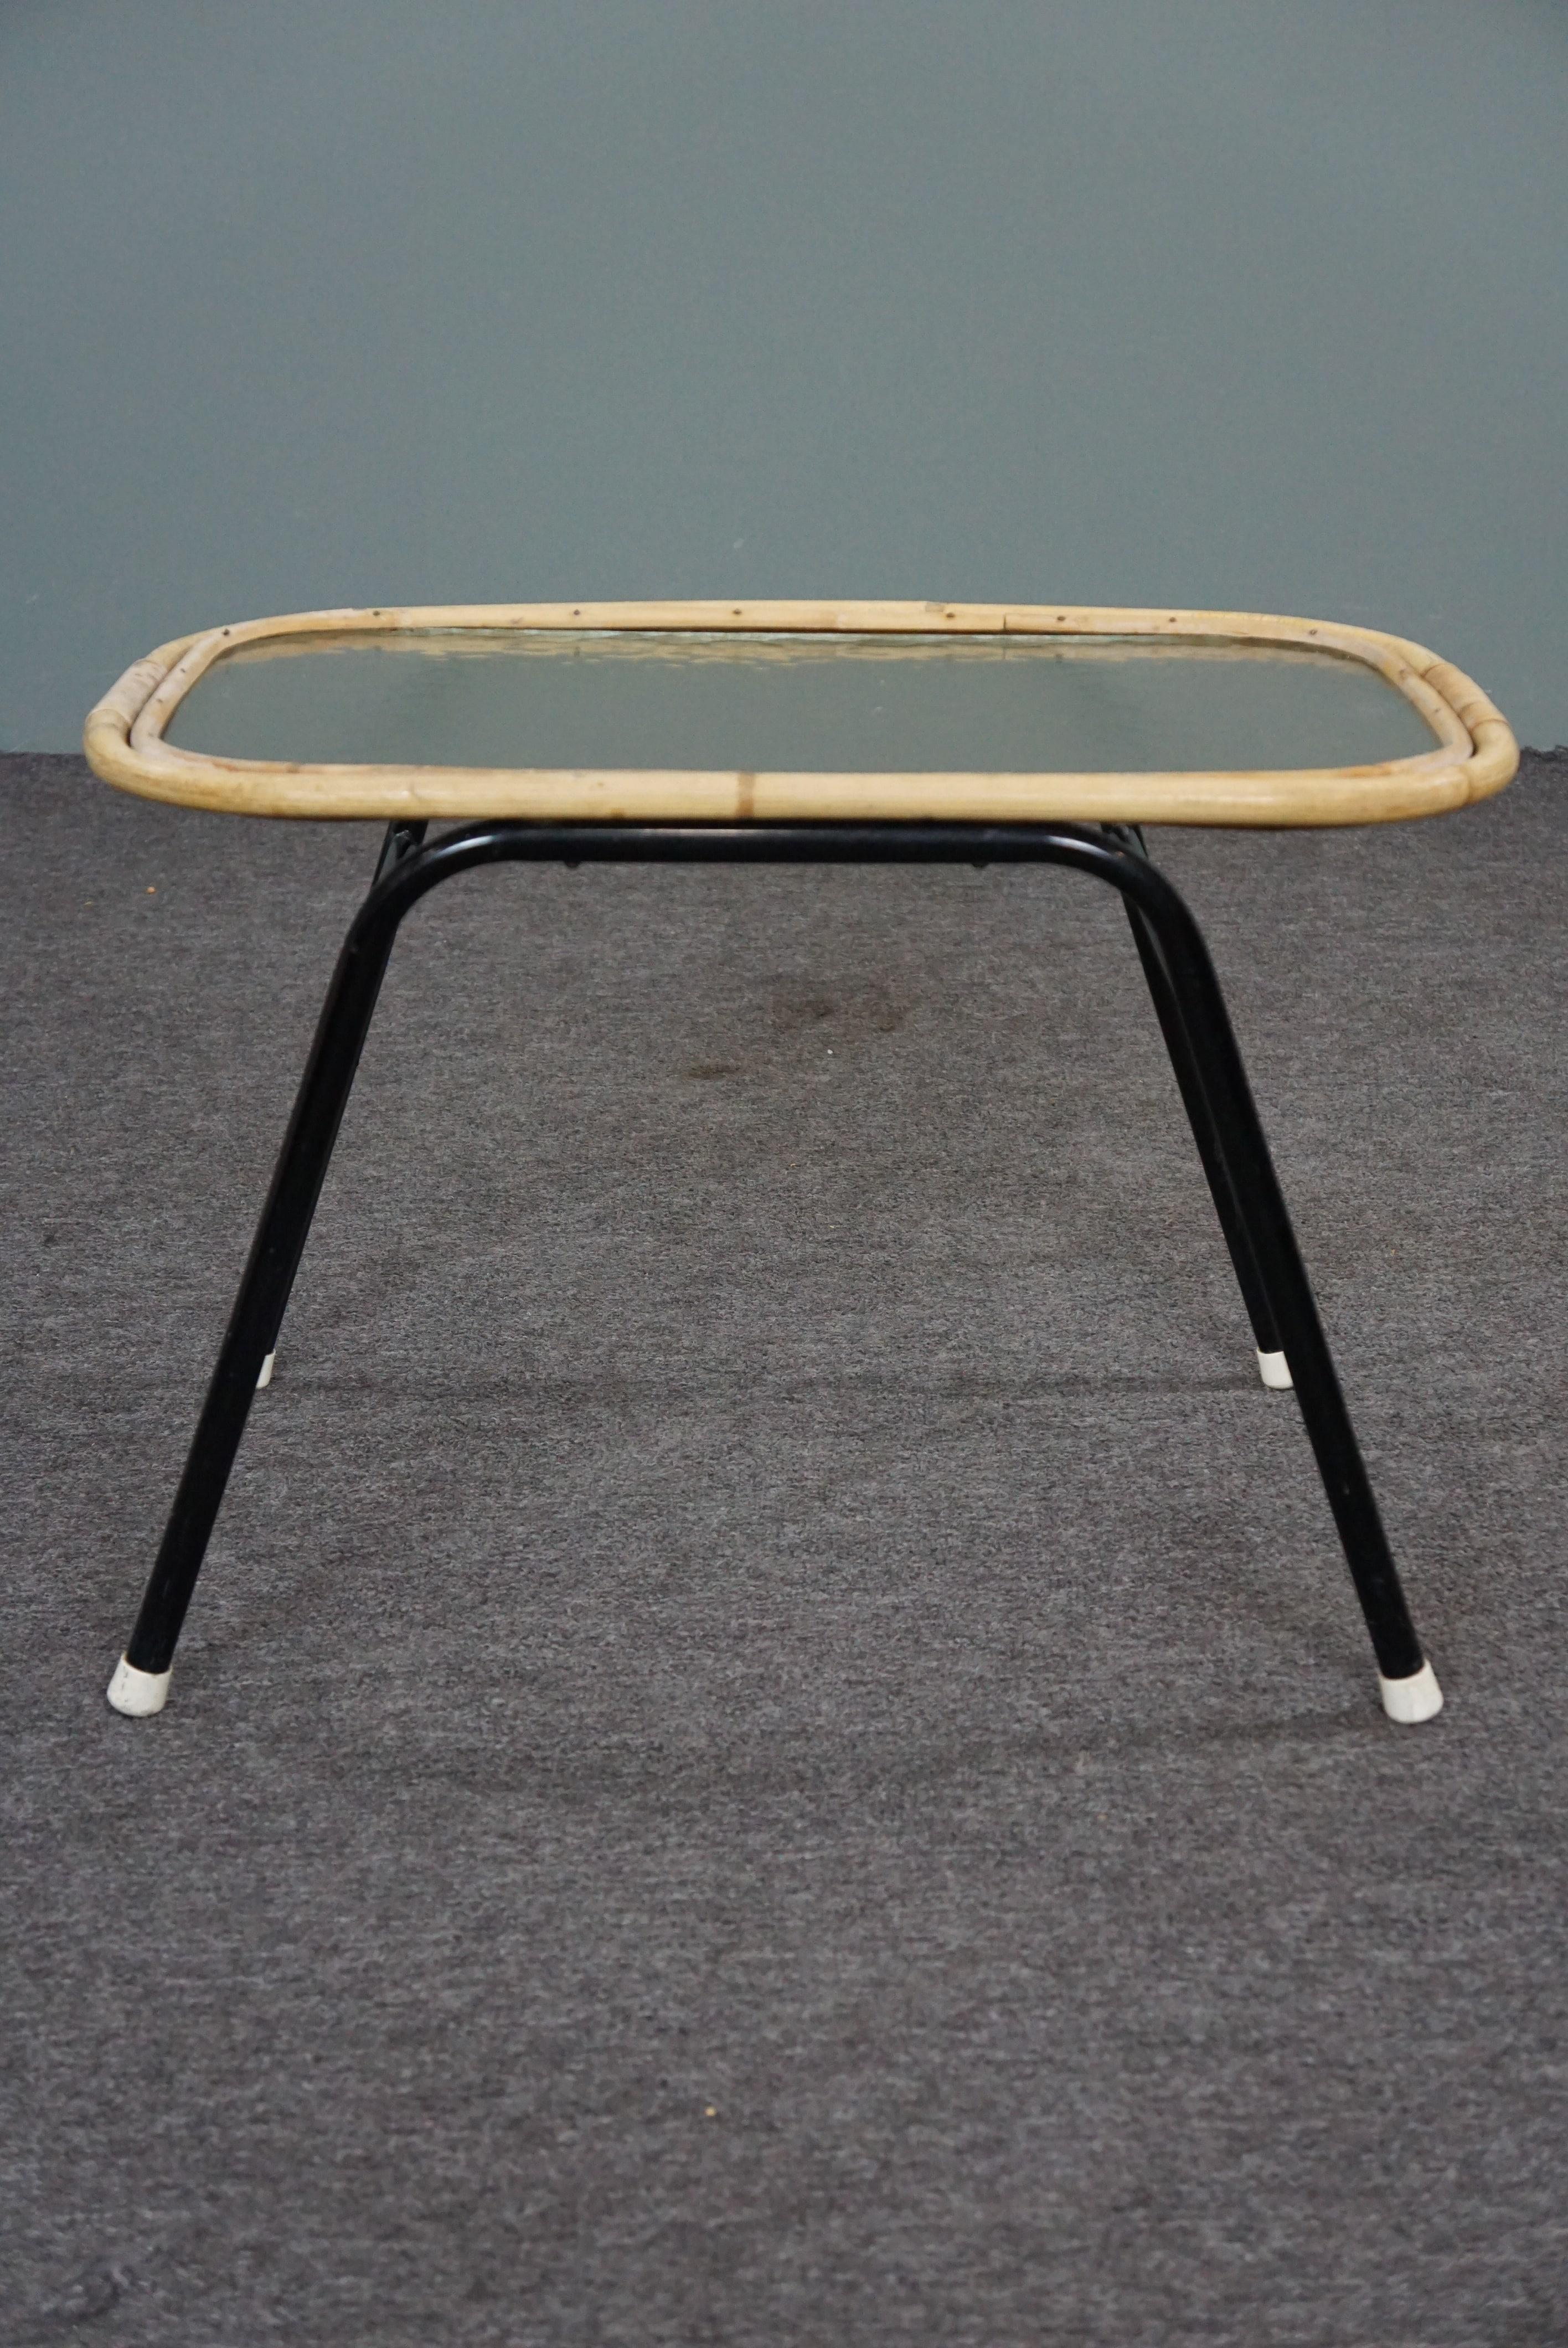 Offered is this beautifully designed rattan coffee table made in the 1960s in the Netherlands.

This beautiful rattan side table has a cloud glass top, a subtle design and black metal legs.

This table was handmade in the 1960s from high-quality